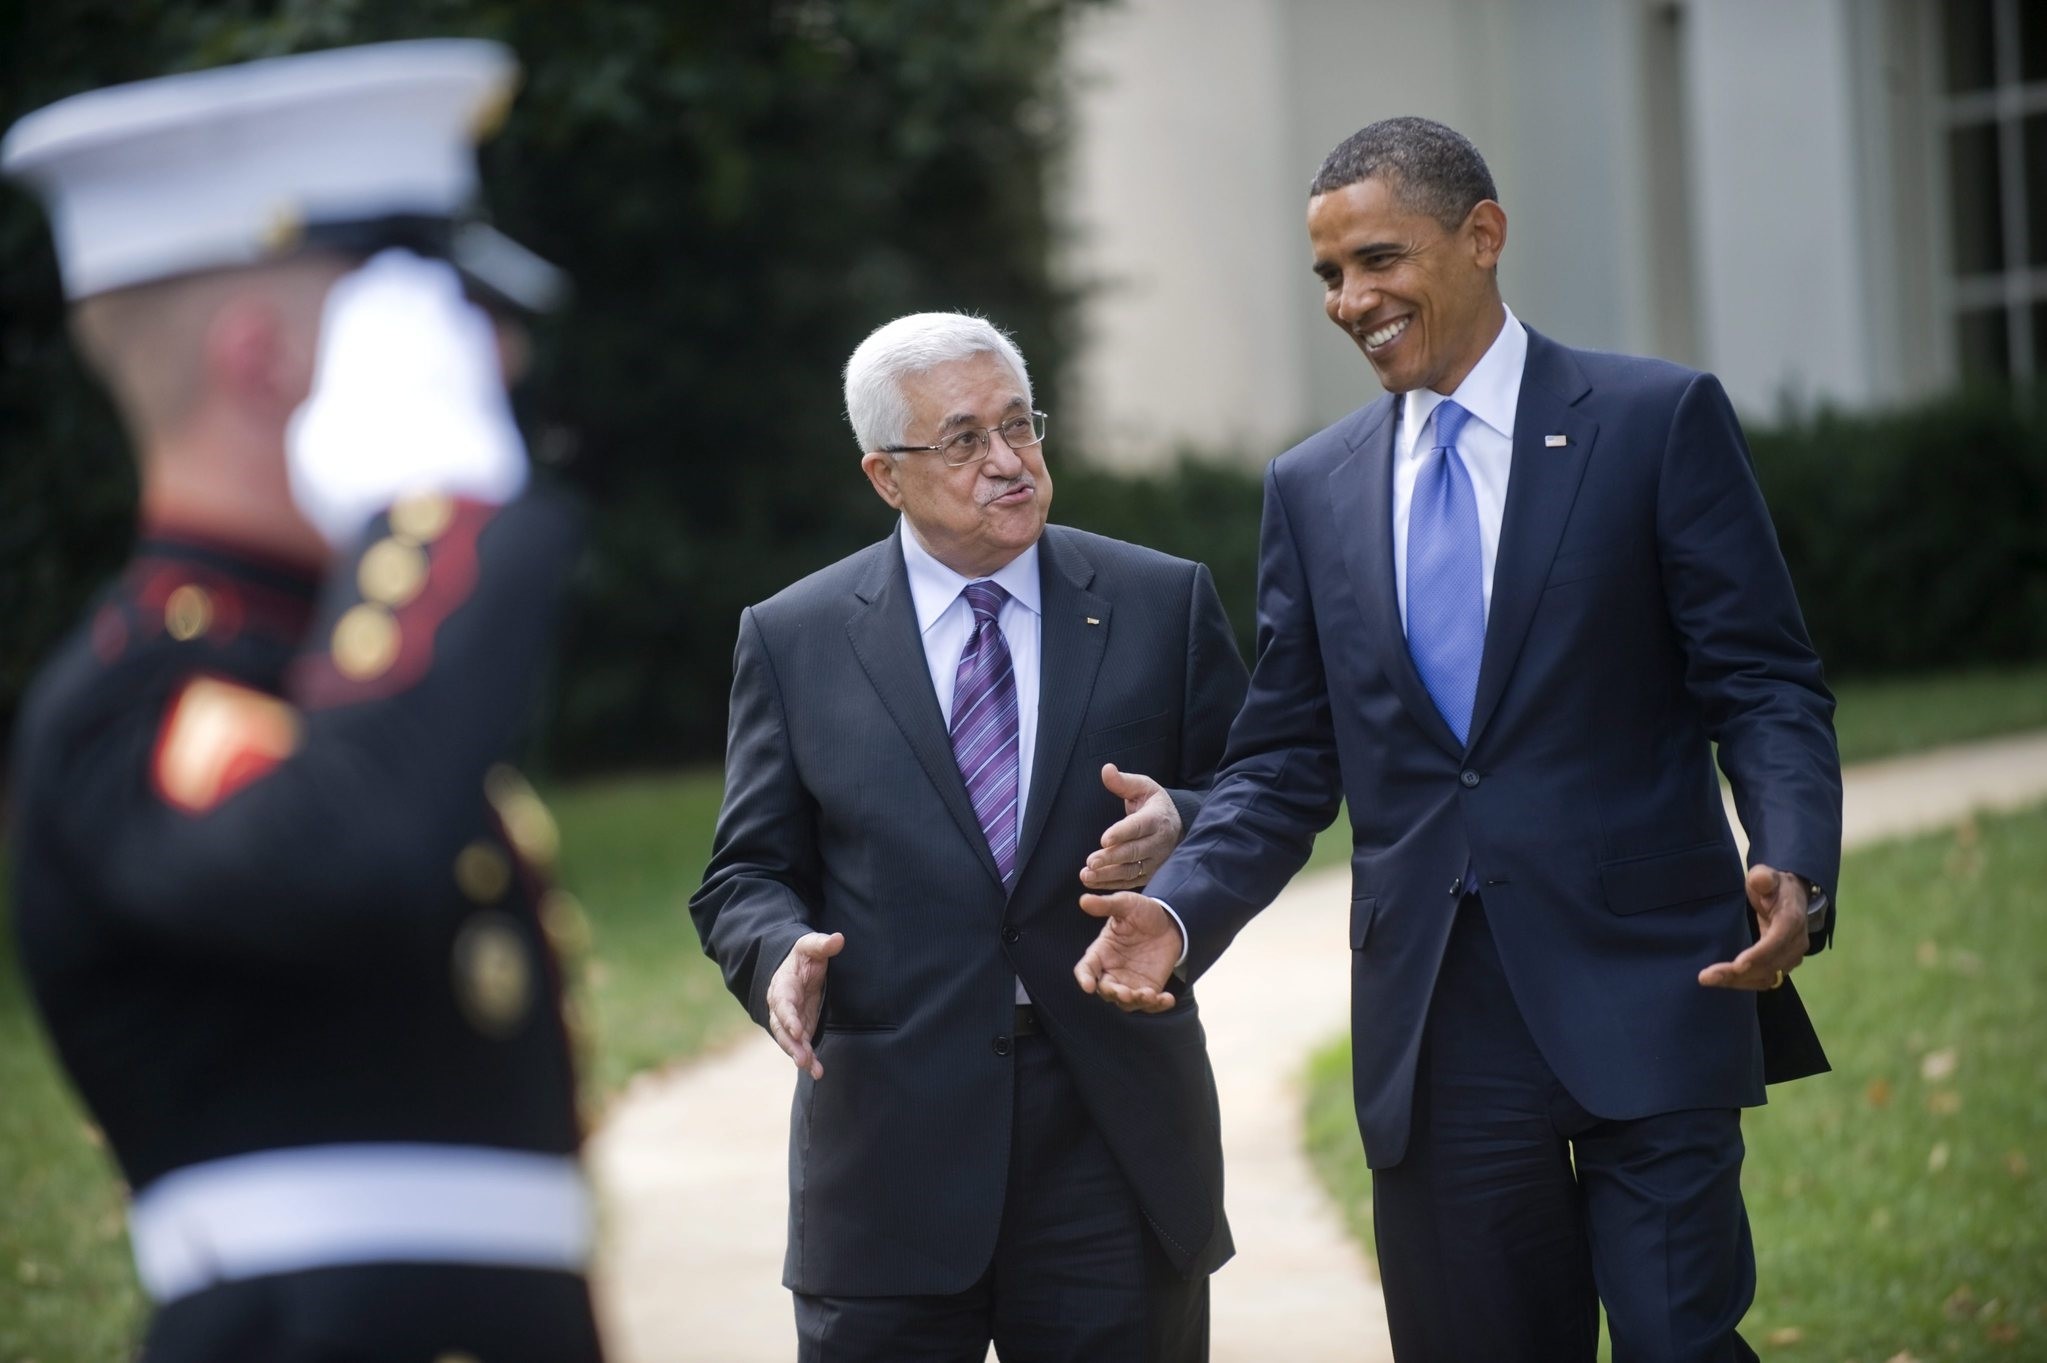 US President Barack Obama (R) talks with Palestinian Authority President Mahmoud Abbas (C), after a meeting in the Oval Office of the White House in Washington, DC, USA. (EPA Photo)